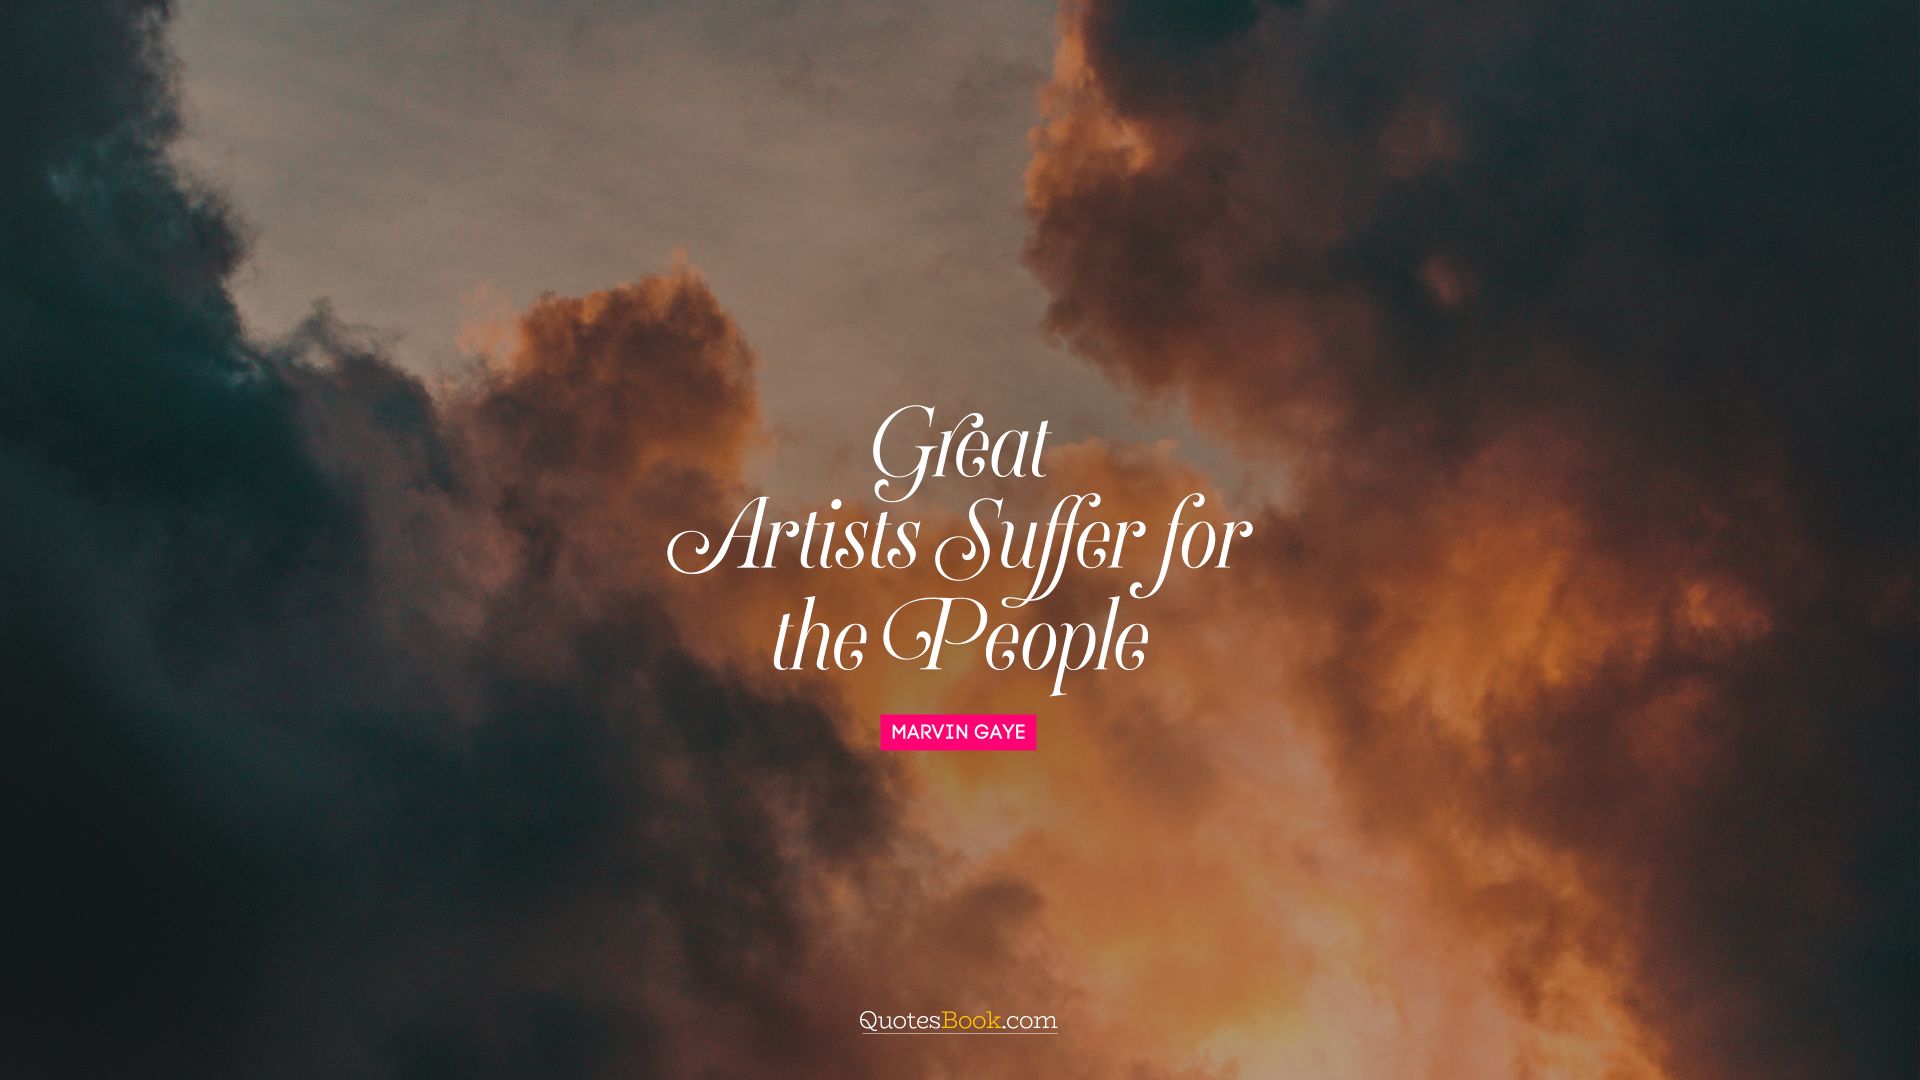 Great artists suffer for the people. - Quote by Marvin Gaye